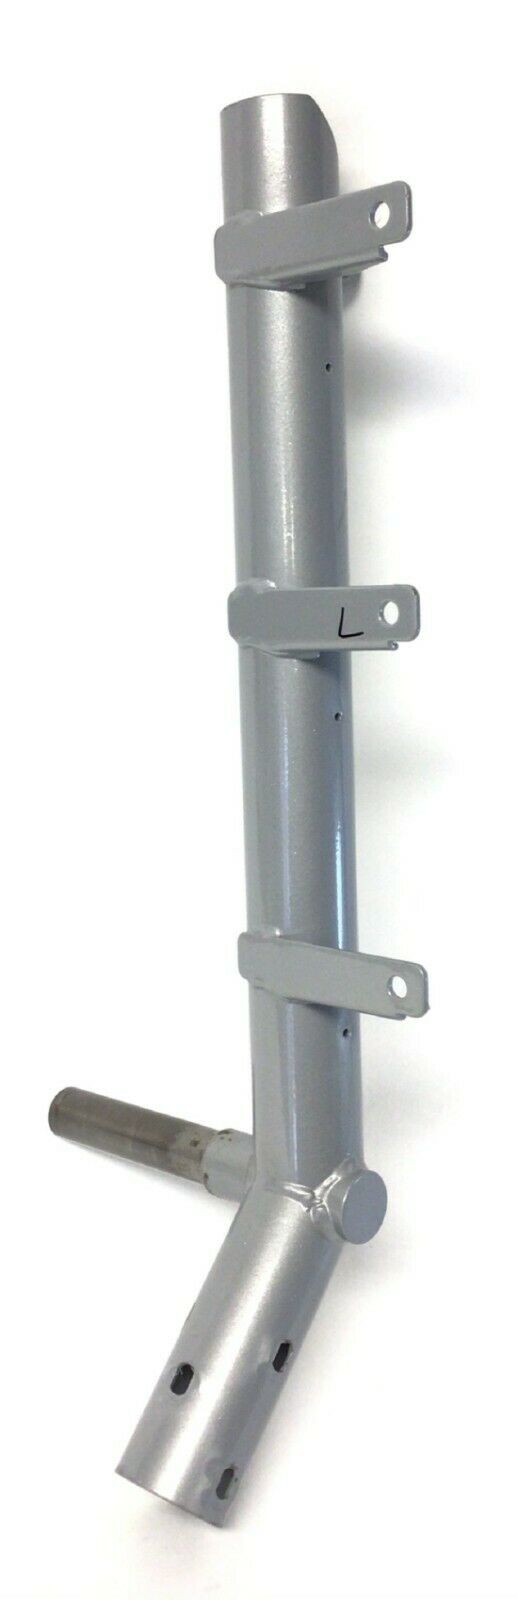 Inspire Fitness CS2 Elliptical Left Foot Pedal Tube Assembly RC800-310-001 - hydrafitnessparts